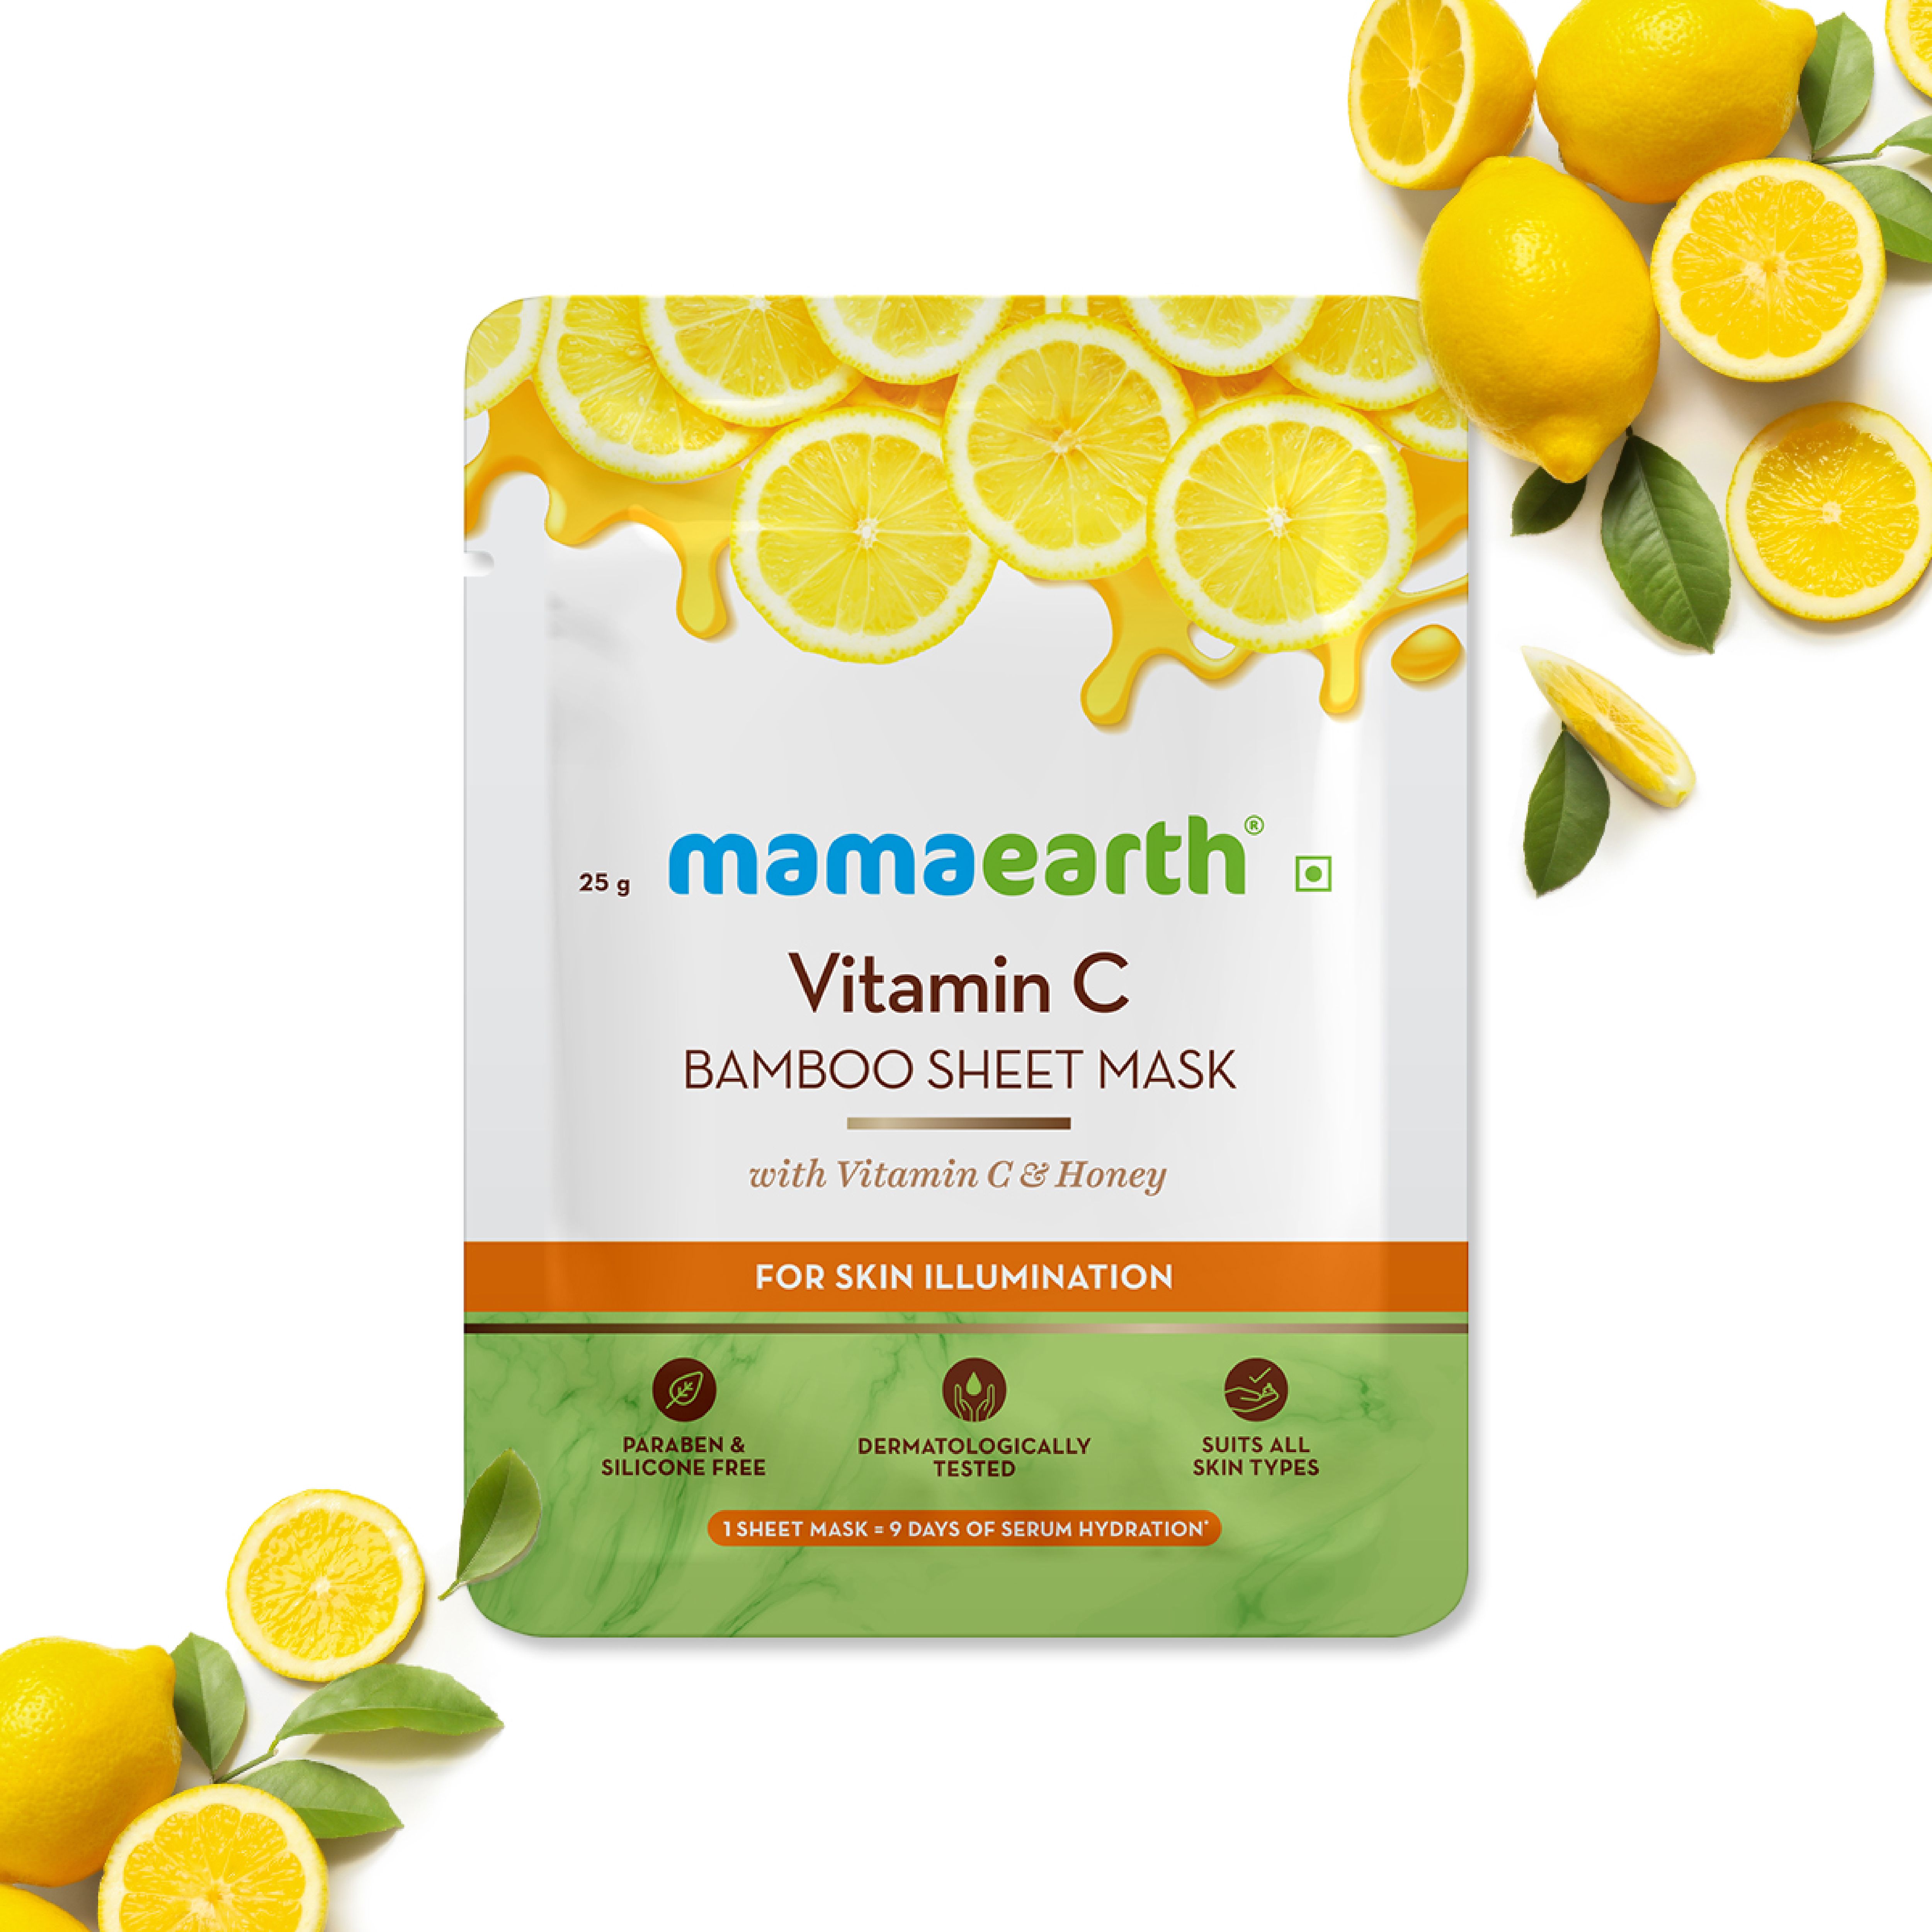 Mamaearth Vitamin C Bamboo Sheet Mask Better Than Others Available in The Market